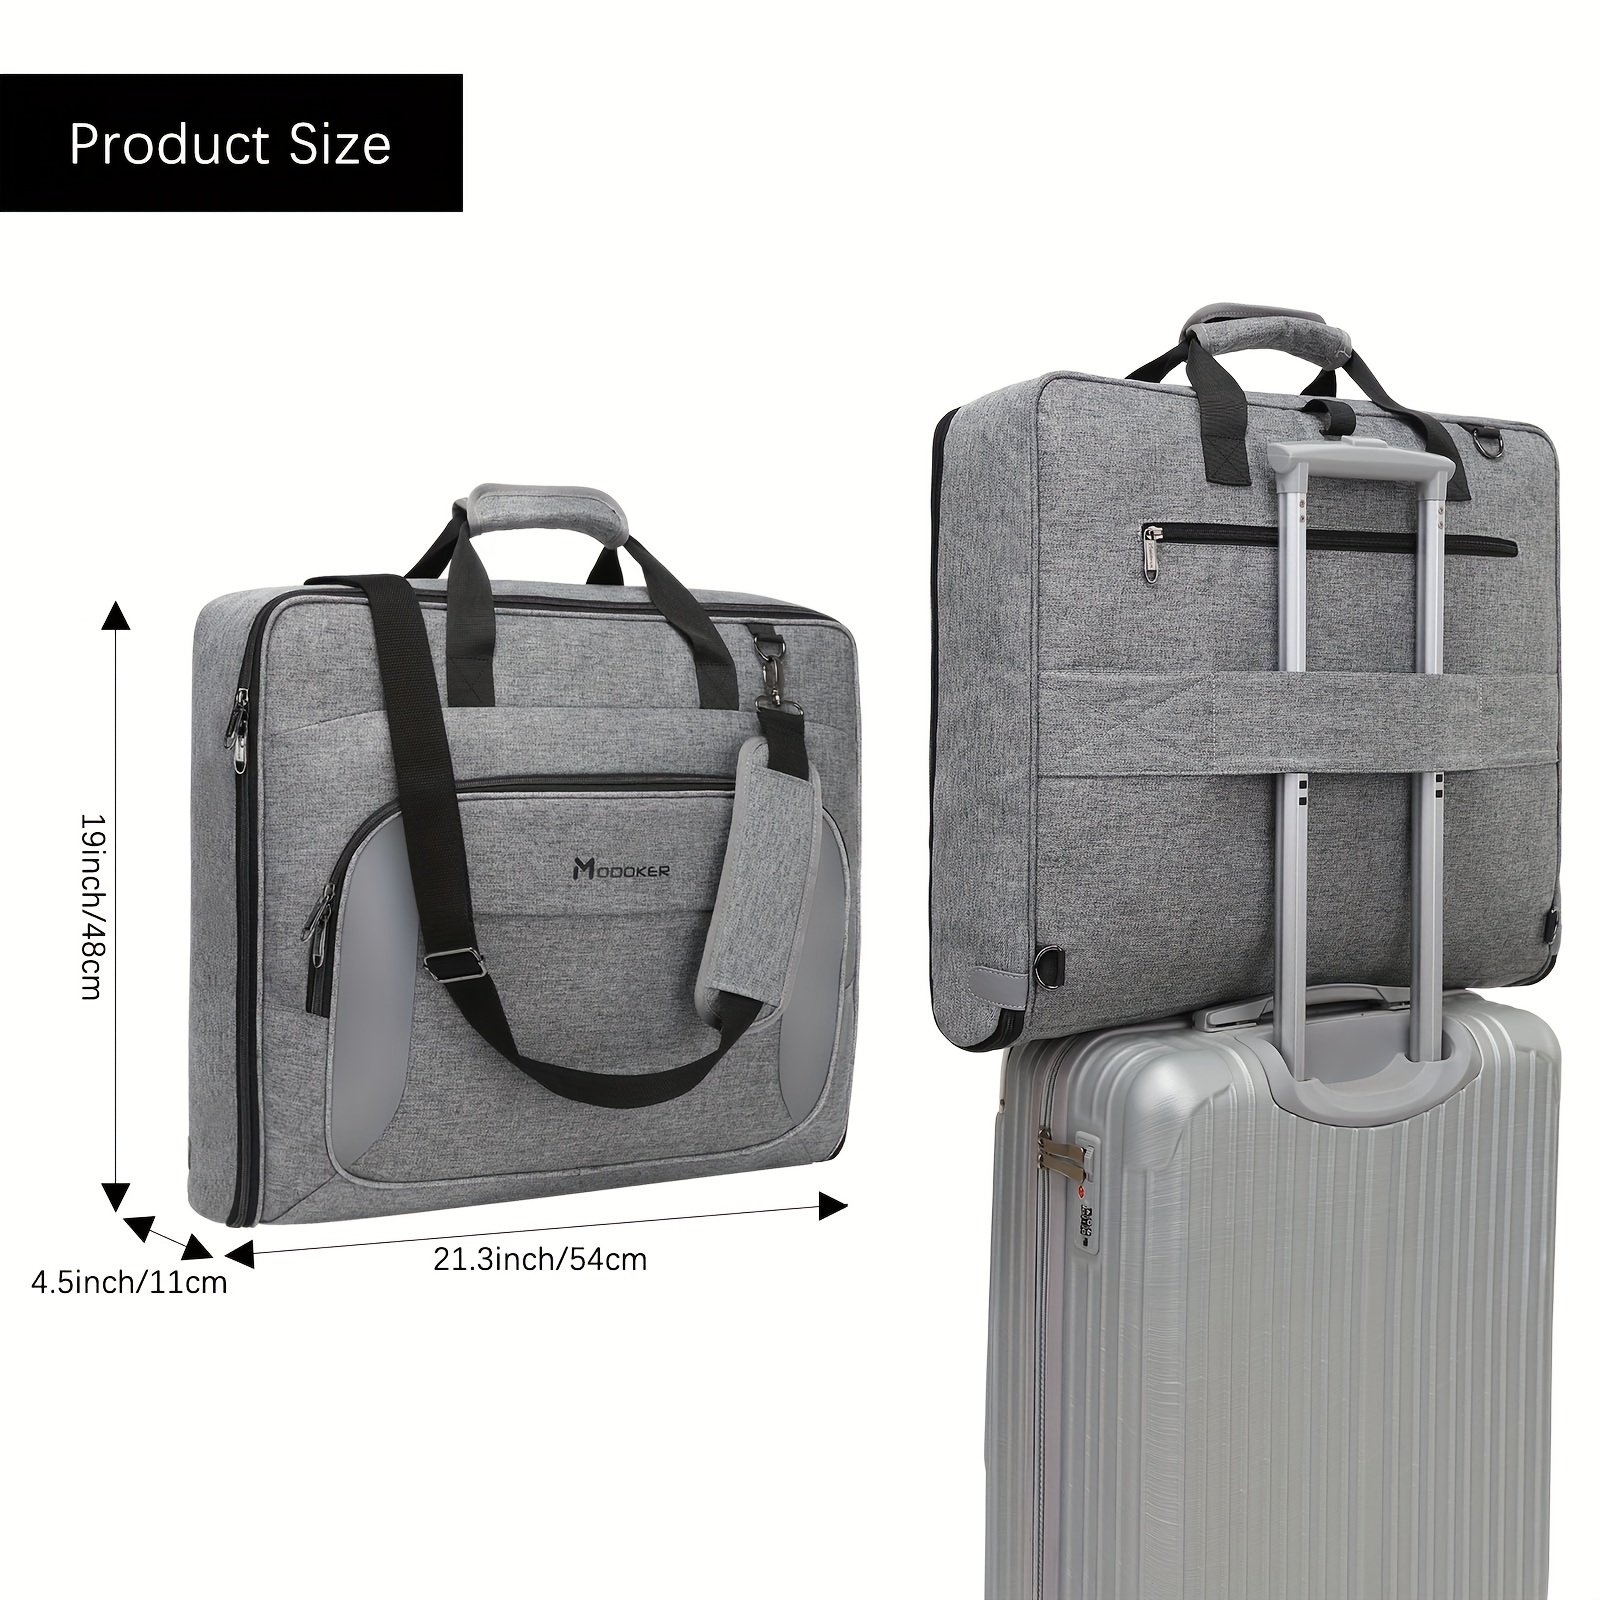 Suit Luggage Garment Bag Suit Carry On Bag Hanging Suitcase With Shoulder  Strap, Garment Bags For Men Women Business Travel